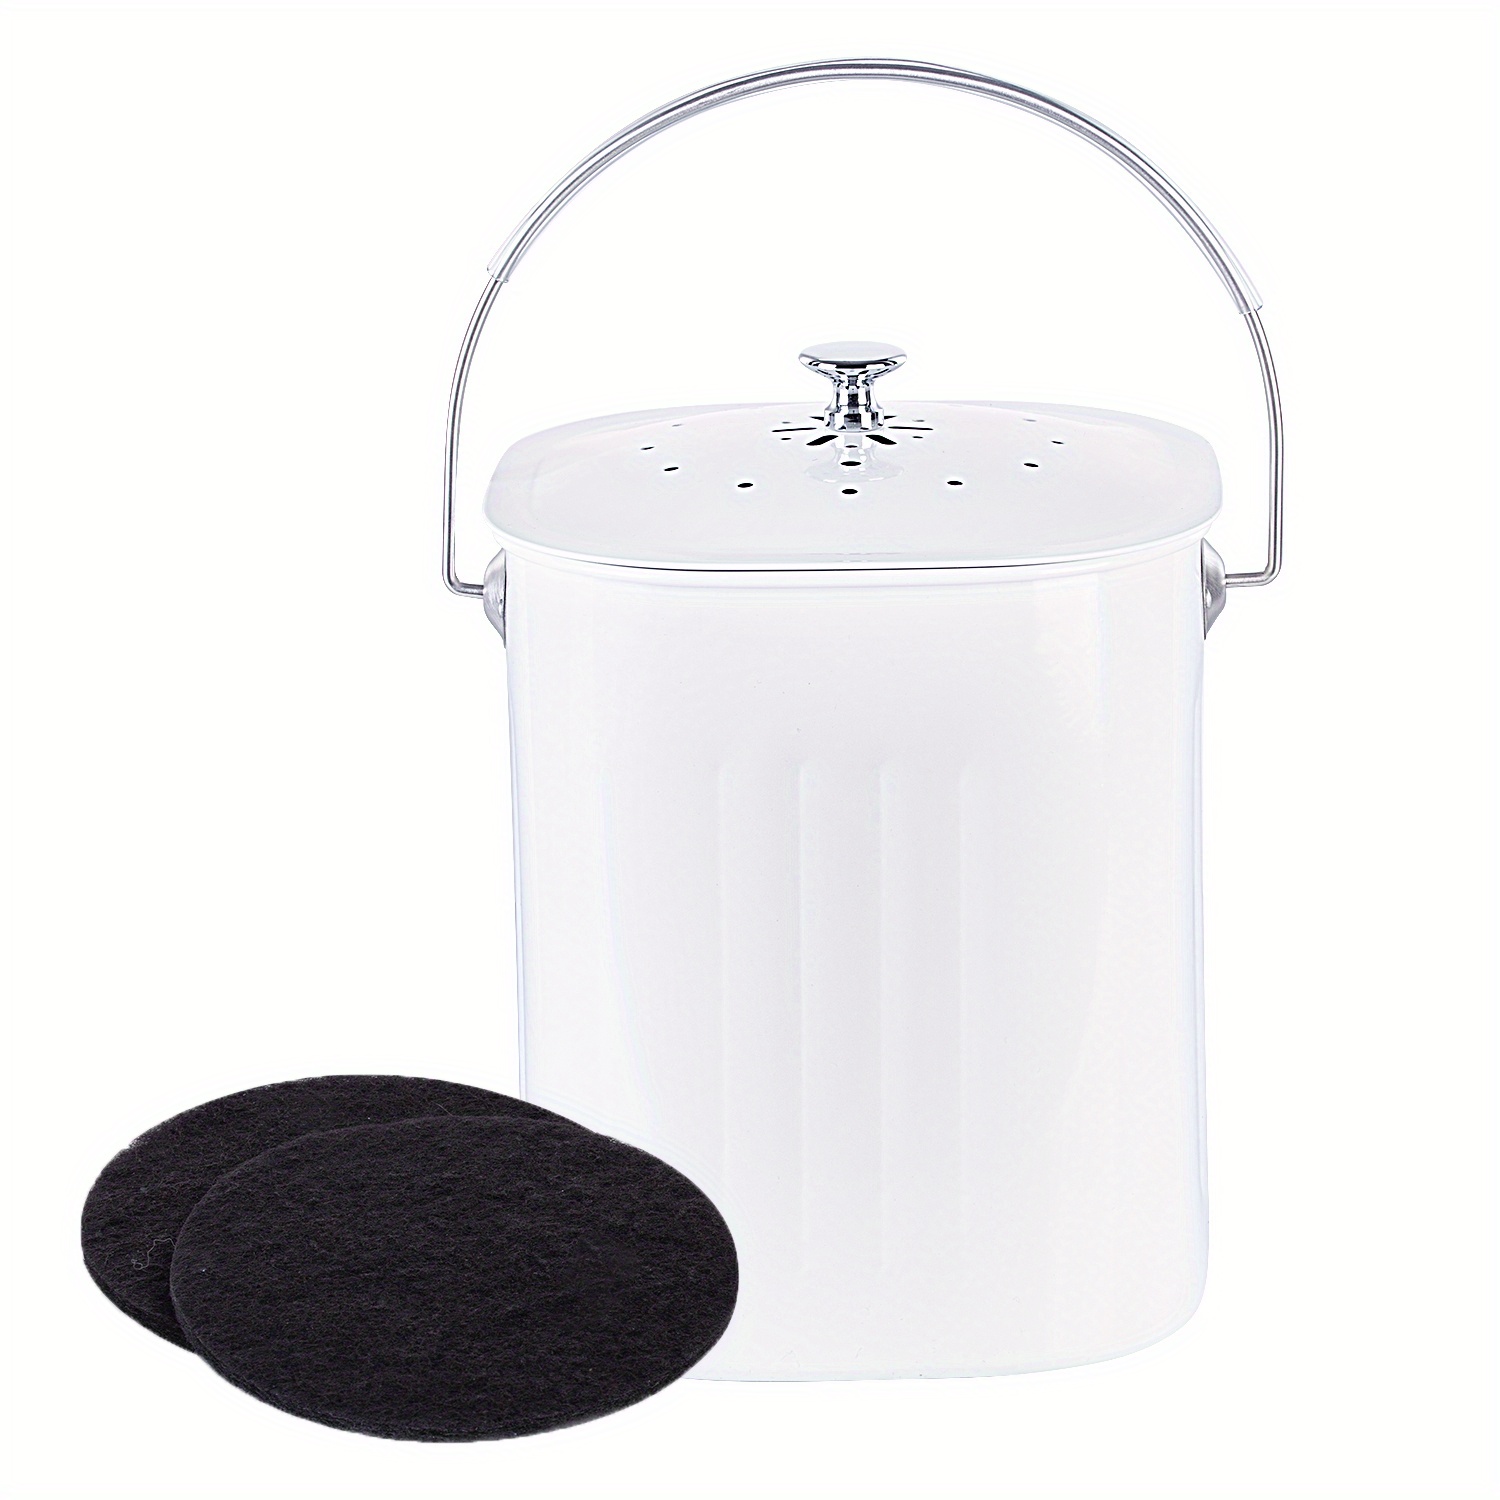 Keep the Smell Away with Compost Crock Filters